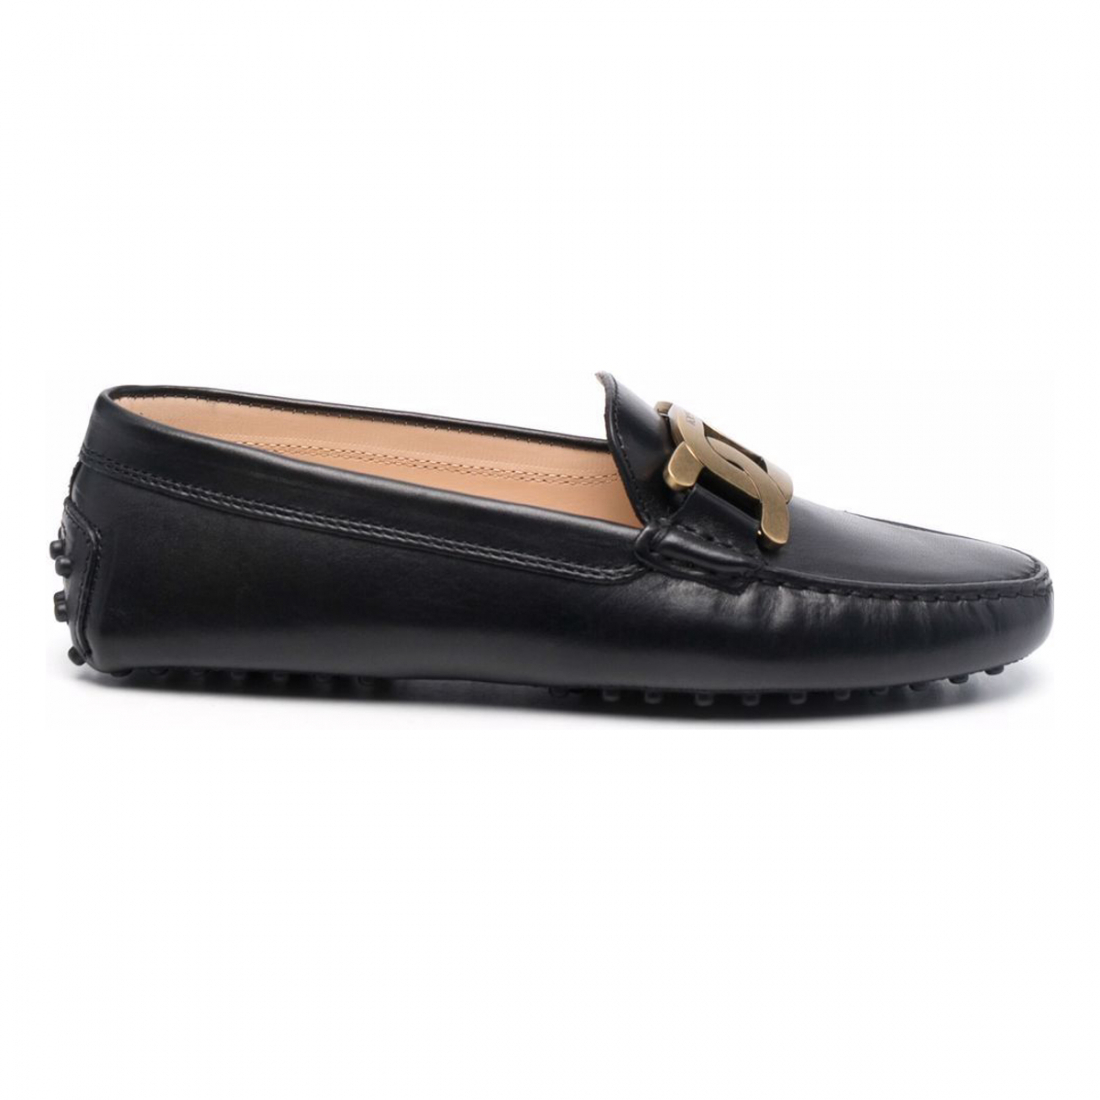 Women's 'Kate' Loafers